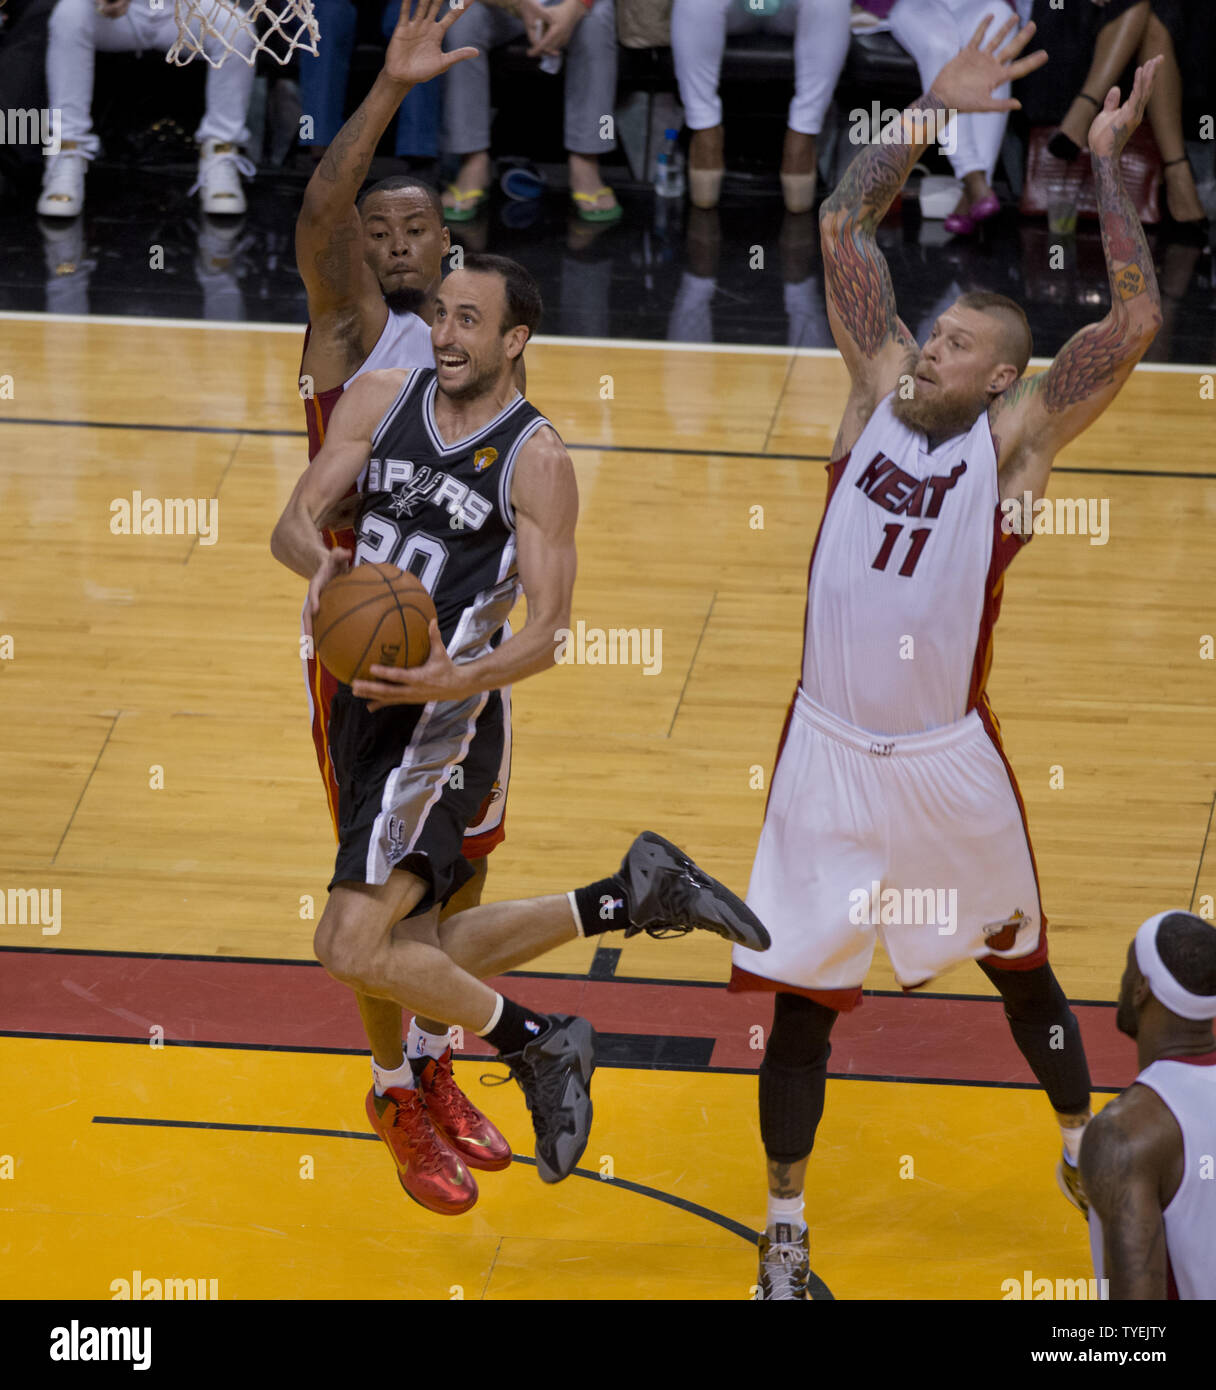 San Antonio Spurs  Manu Ginobili (20) goes up for the basket being guarded by Miami Heat  Chris Andersen (11)in game 3 of the NBA Finals at the American Airlines Arena, in Miami, June 10, 2014. The Spurs defeated the Heat 111-92 to take a 2 -1 game  lead in the best of seven series.    UPI/Gary I Rothstein Stock Photo